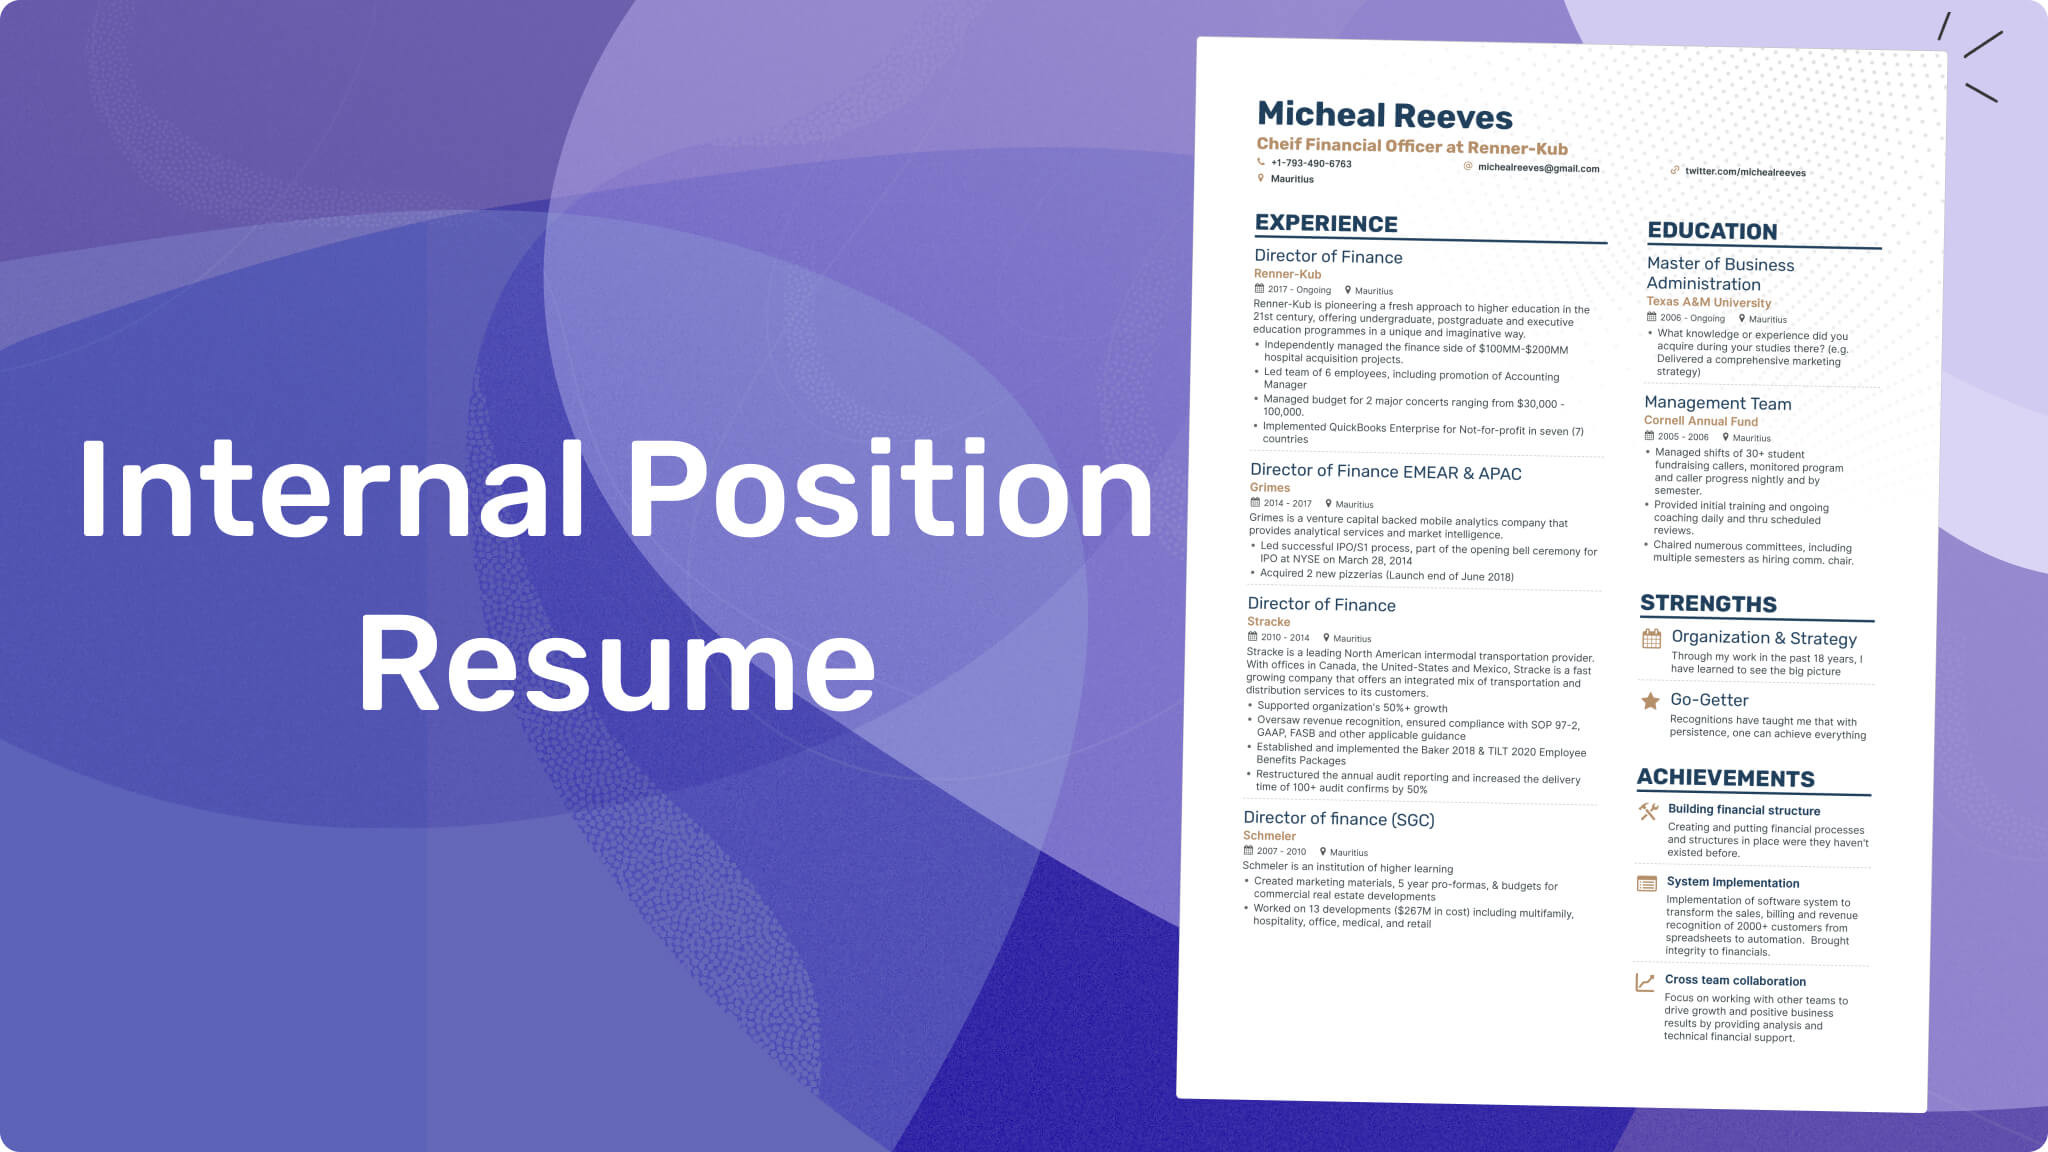 Sample Resume for Promotion within Same Company Examples Resume for Internal Position â How to Make One